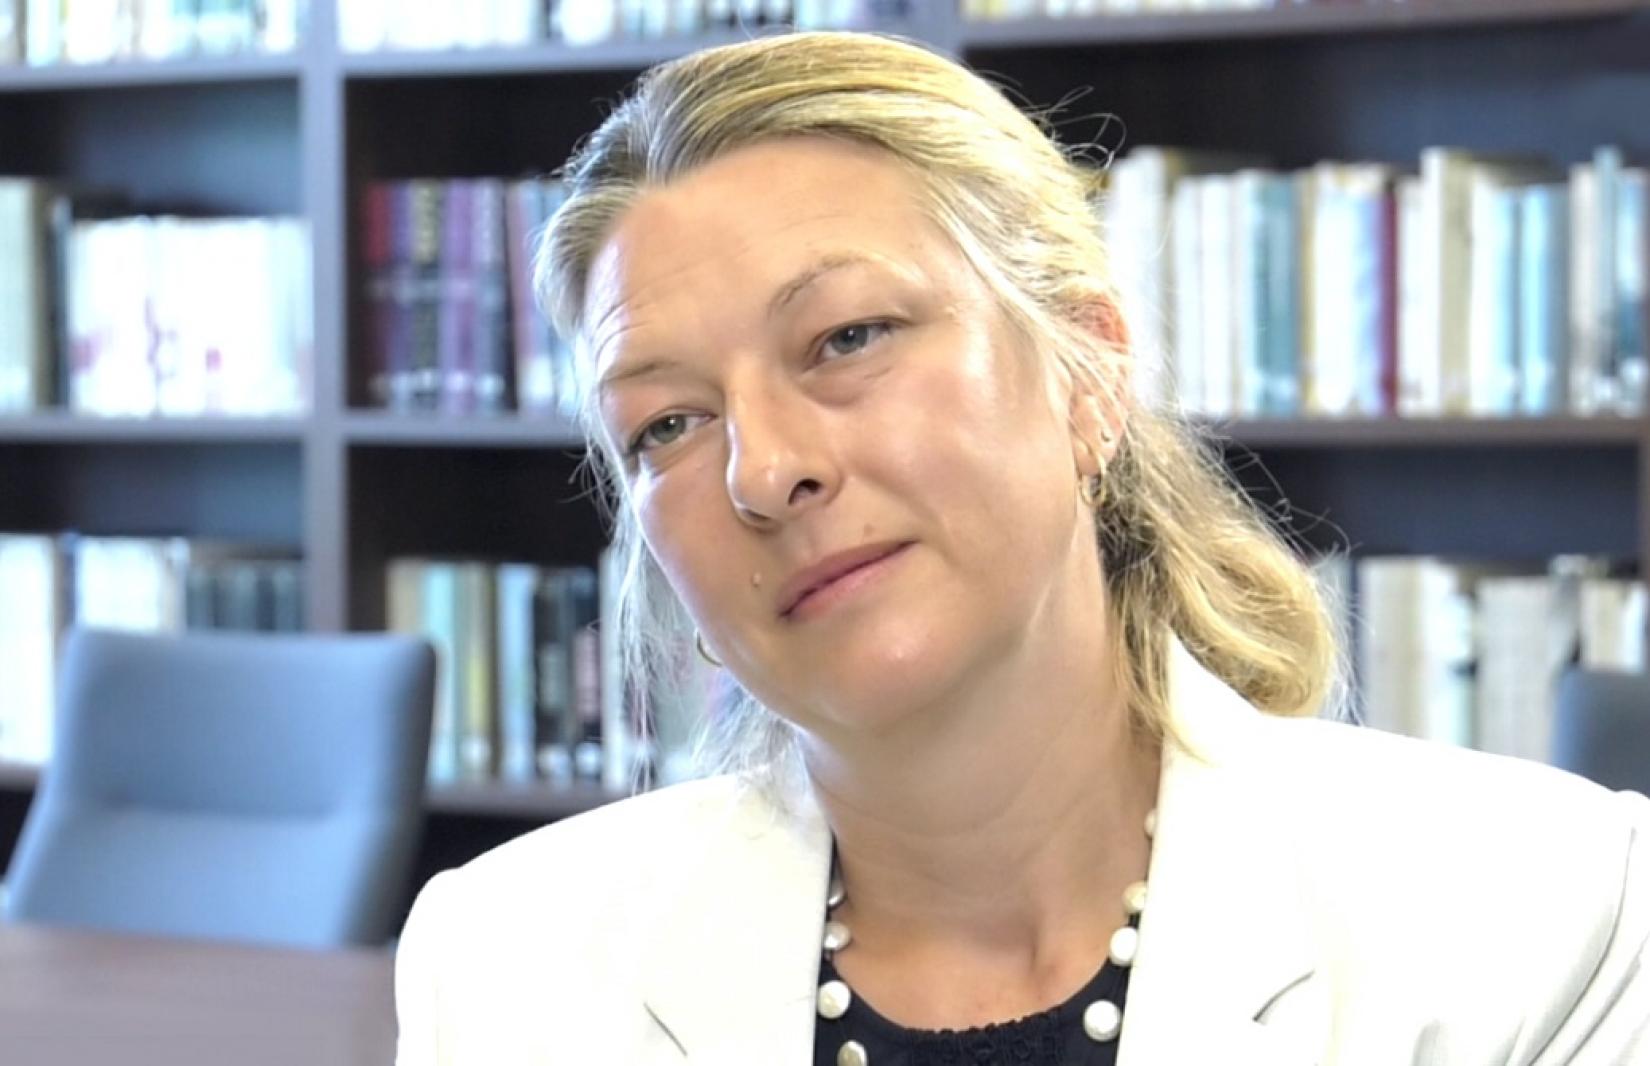 Anaïs Marin, UN Special Rapporteur on the situation of human rights in Belarus